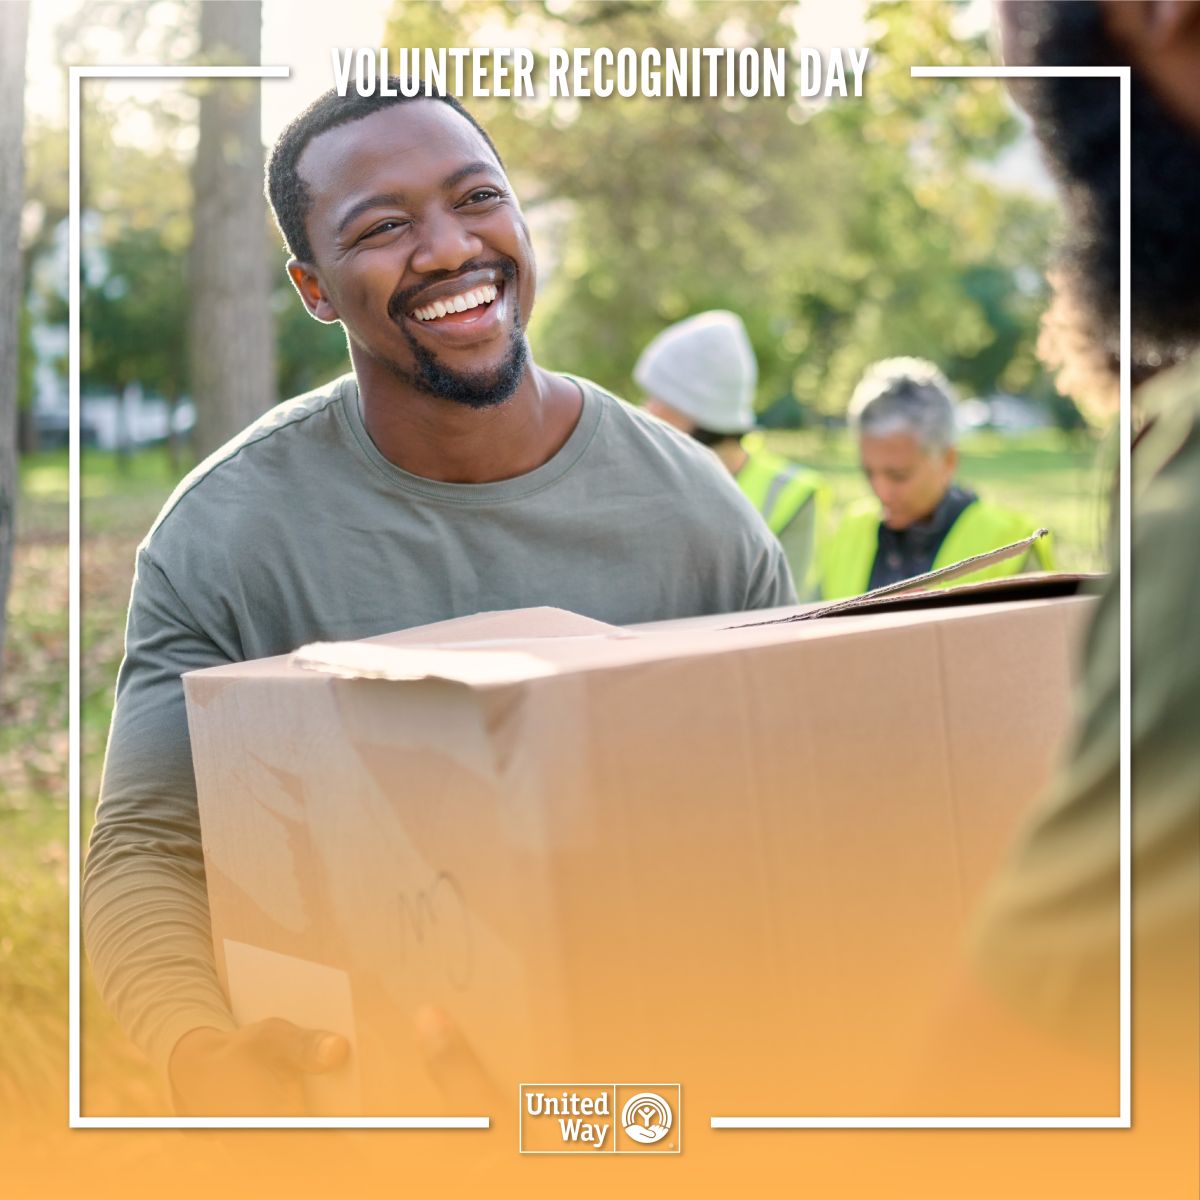 Happy Volunteer Recognition Day! We are so thankful for all our volunteers who selflessly benefit the lives of others.

#togetherweliveunited #comalcounty #uwcc #liveunited